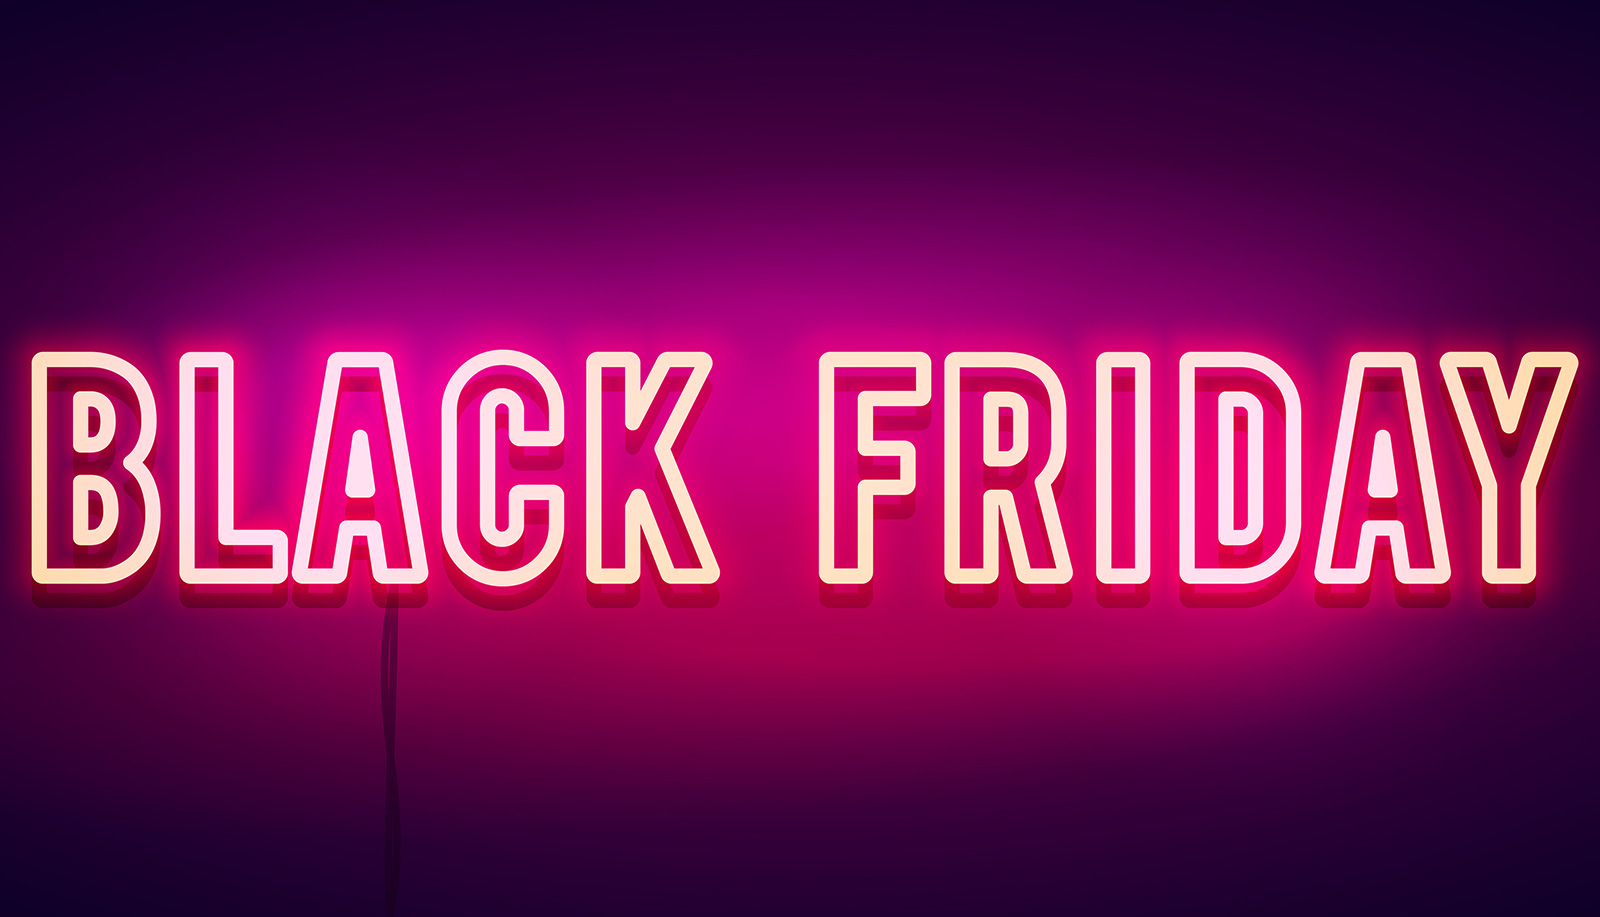 A glowing neon Black Friday sign with a dark background